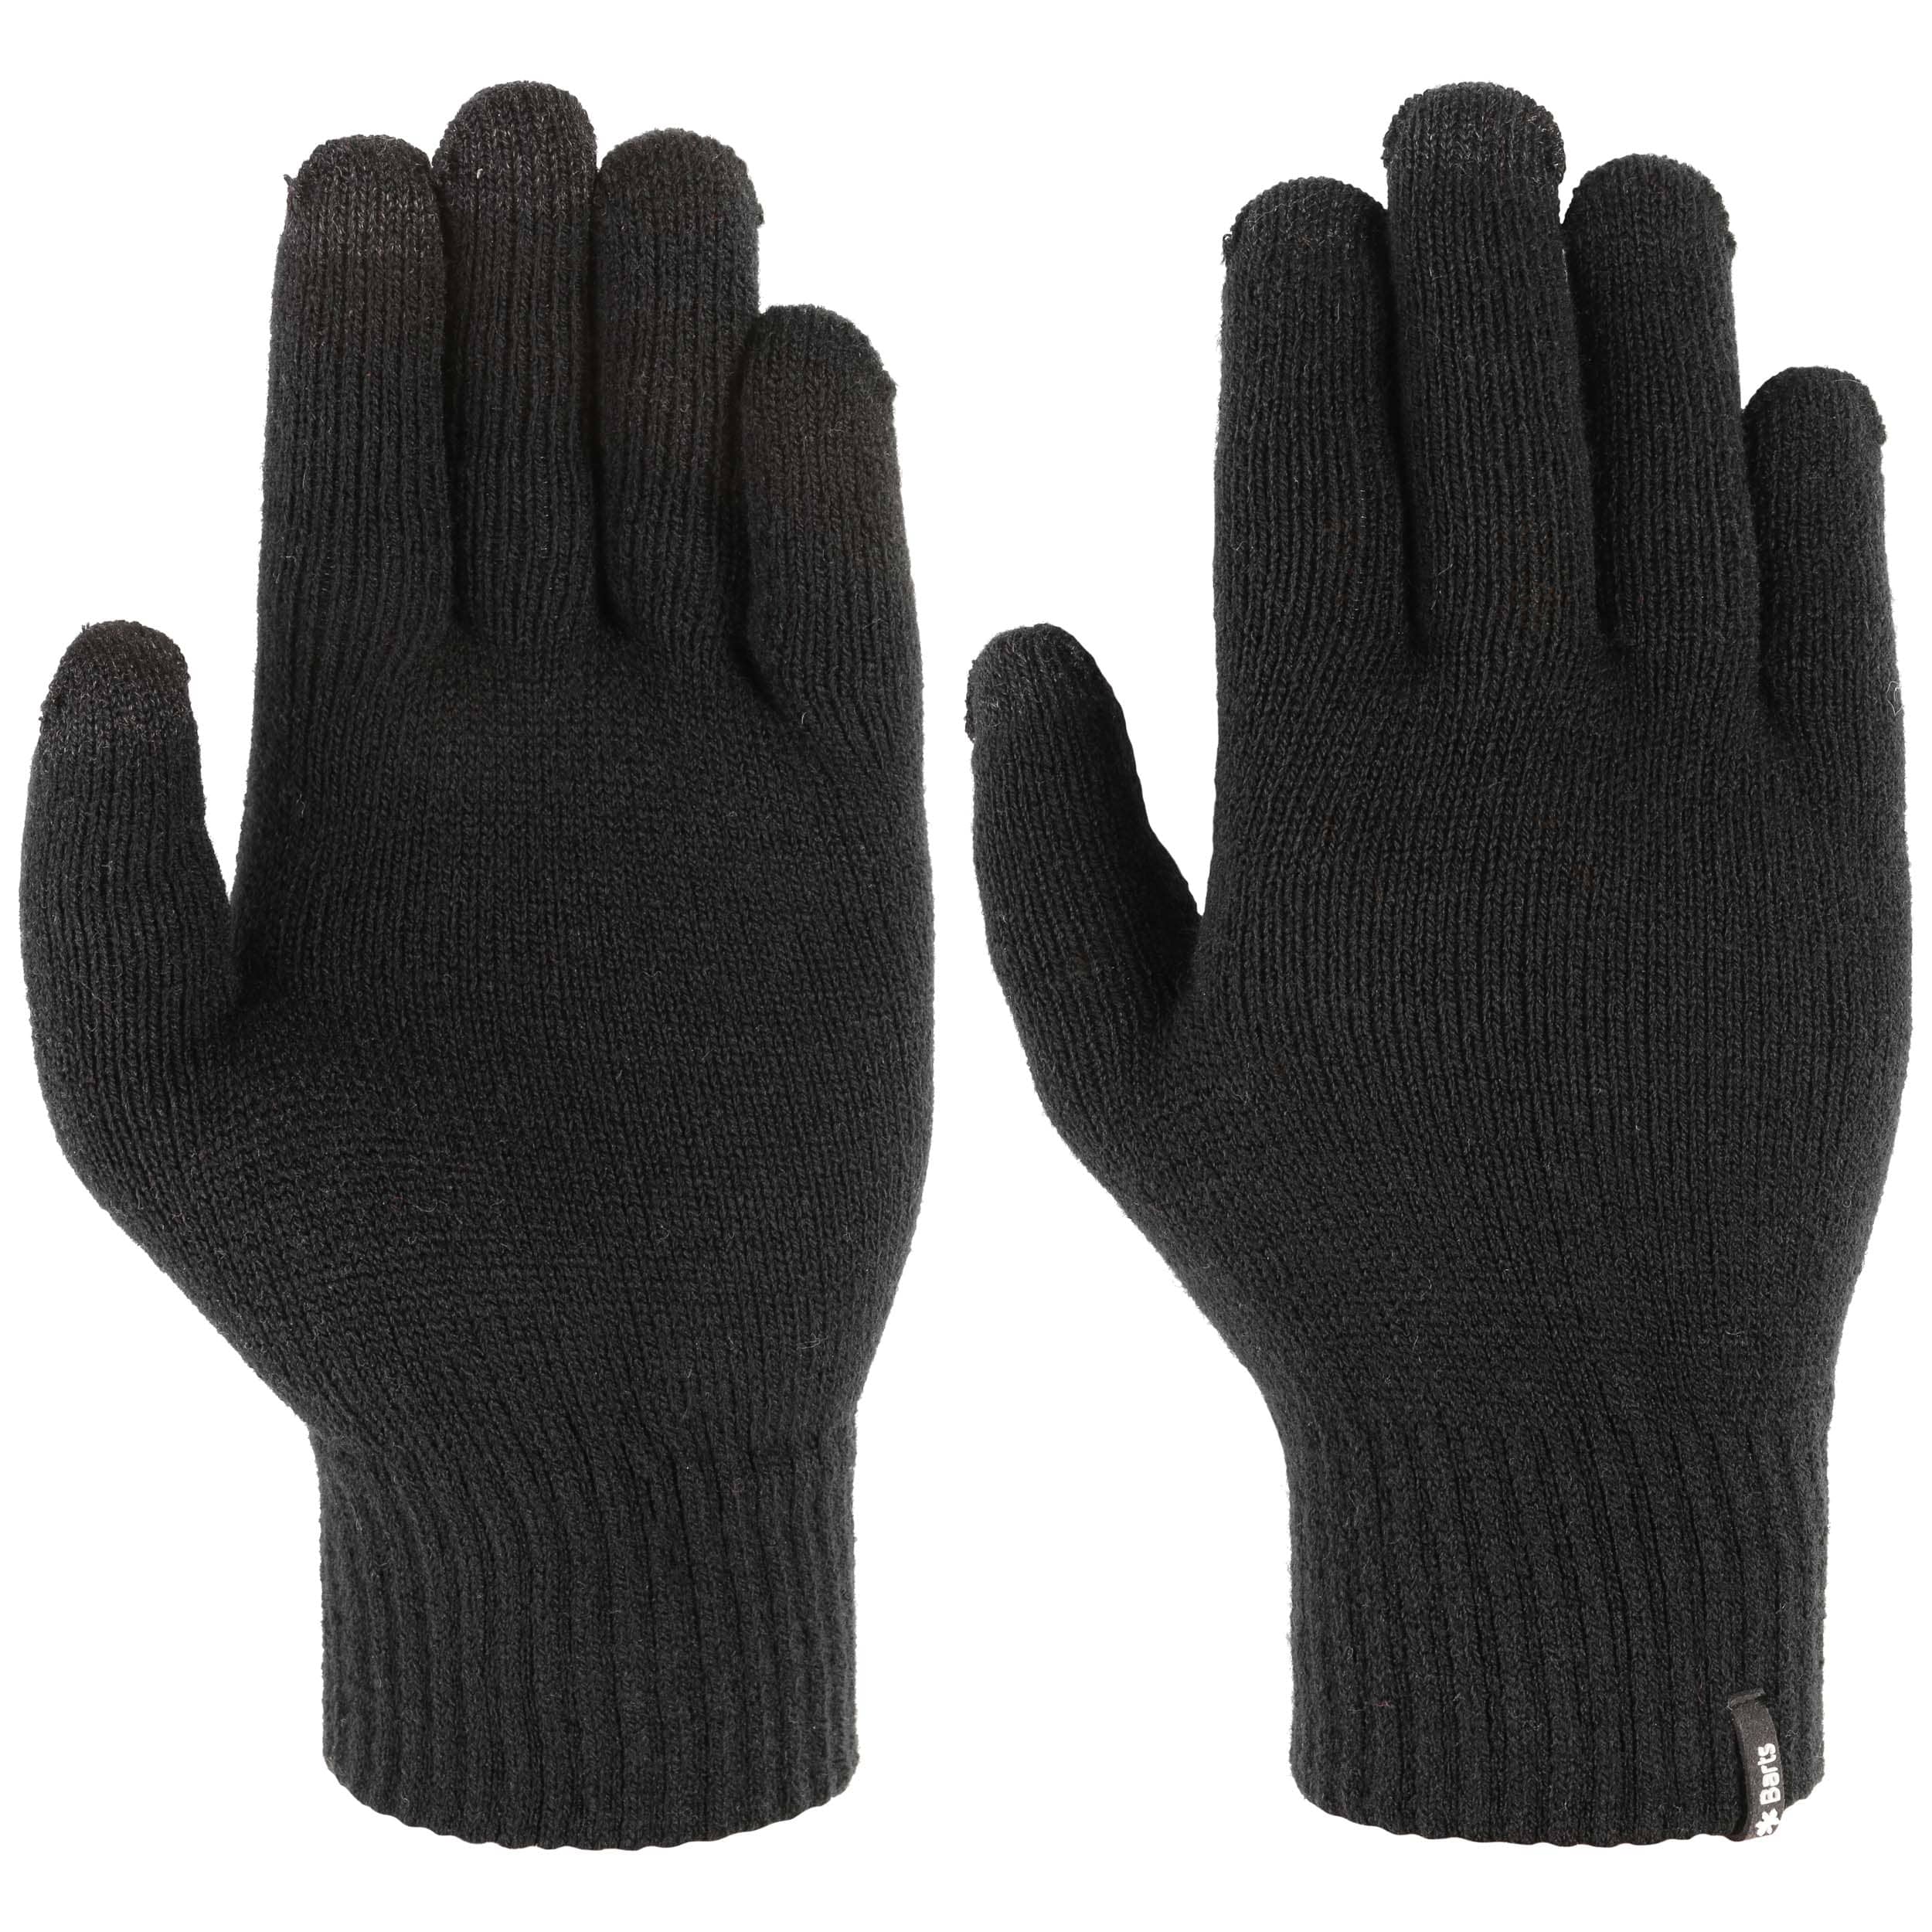 Men Gloves Touch Screen Winter Warm Practical Kintted Black Smartphone Gloves